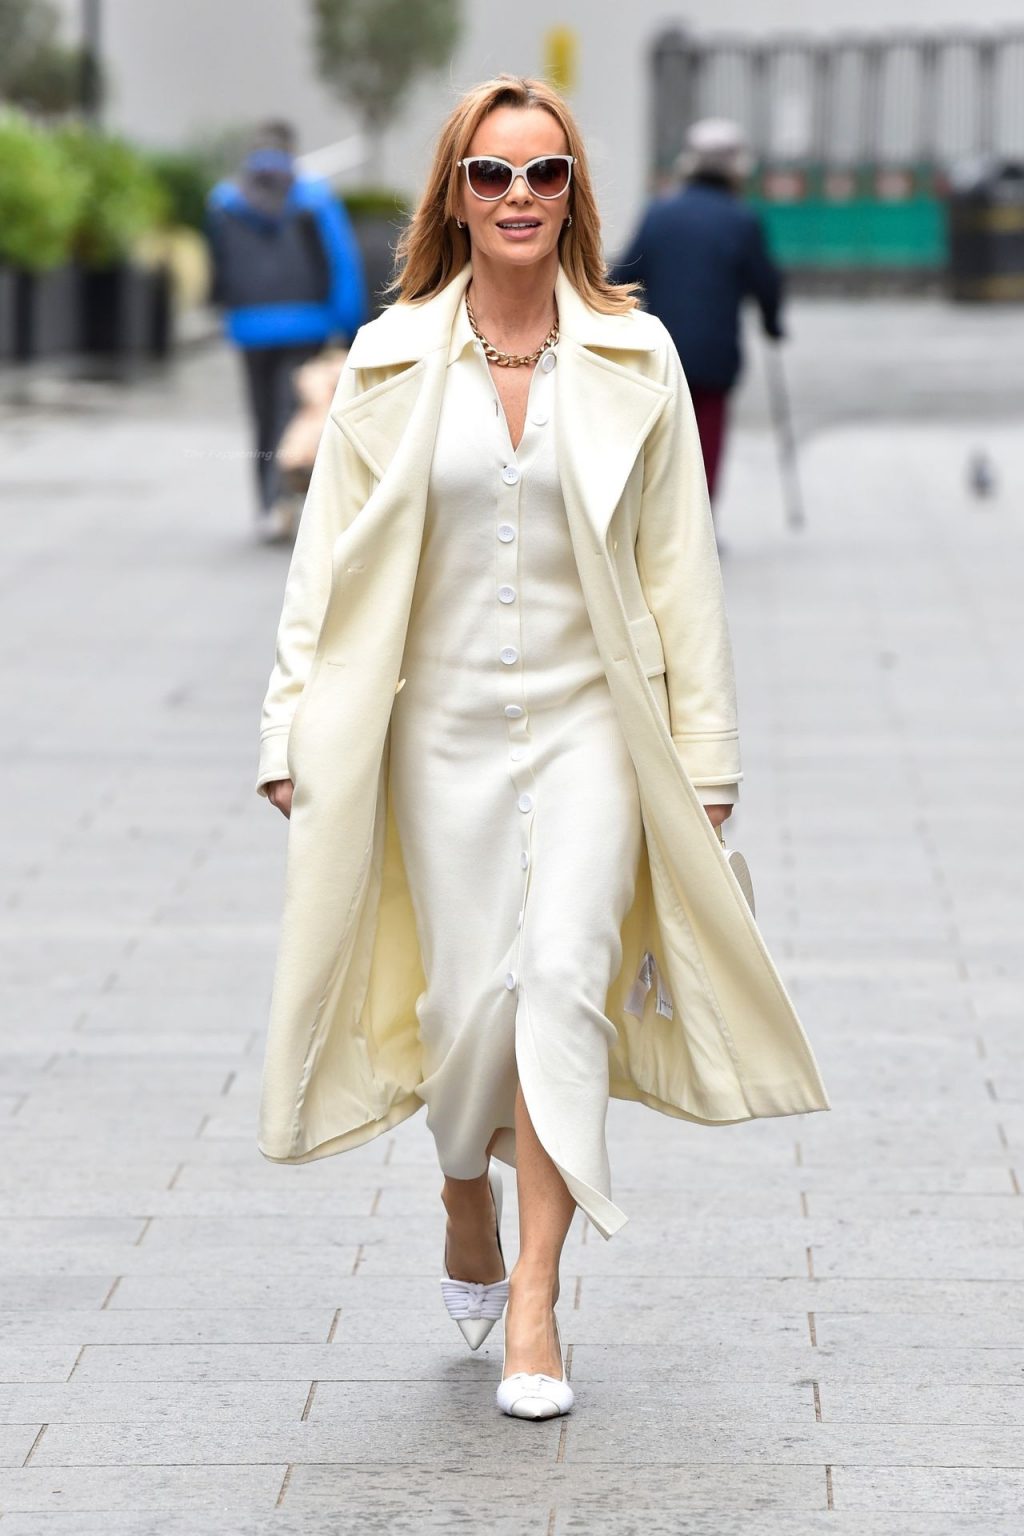 Amanda Holden is Pictured Leaving the Global Studios (21 Photos)